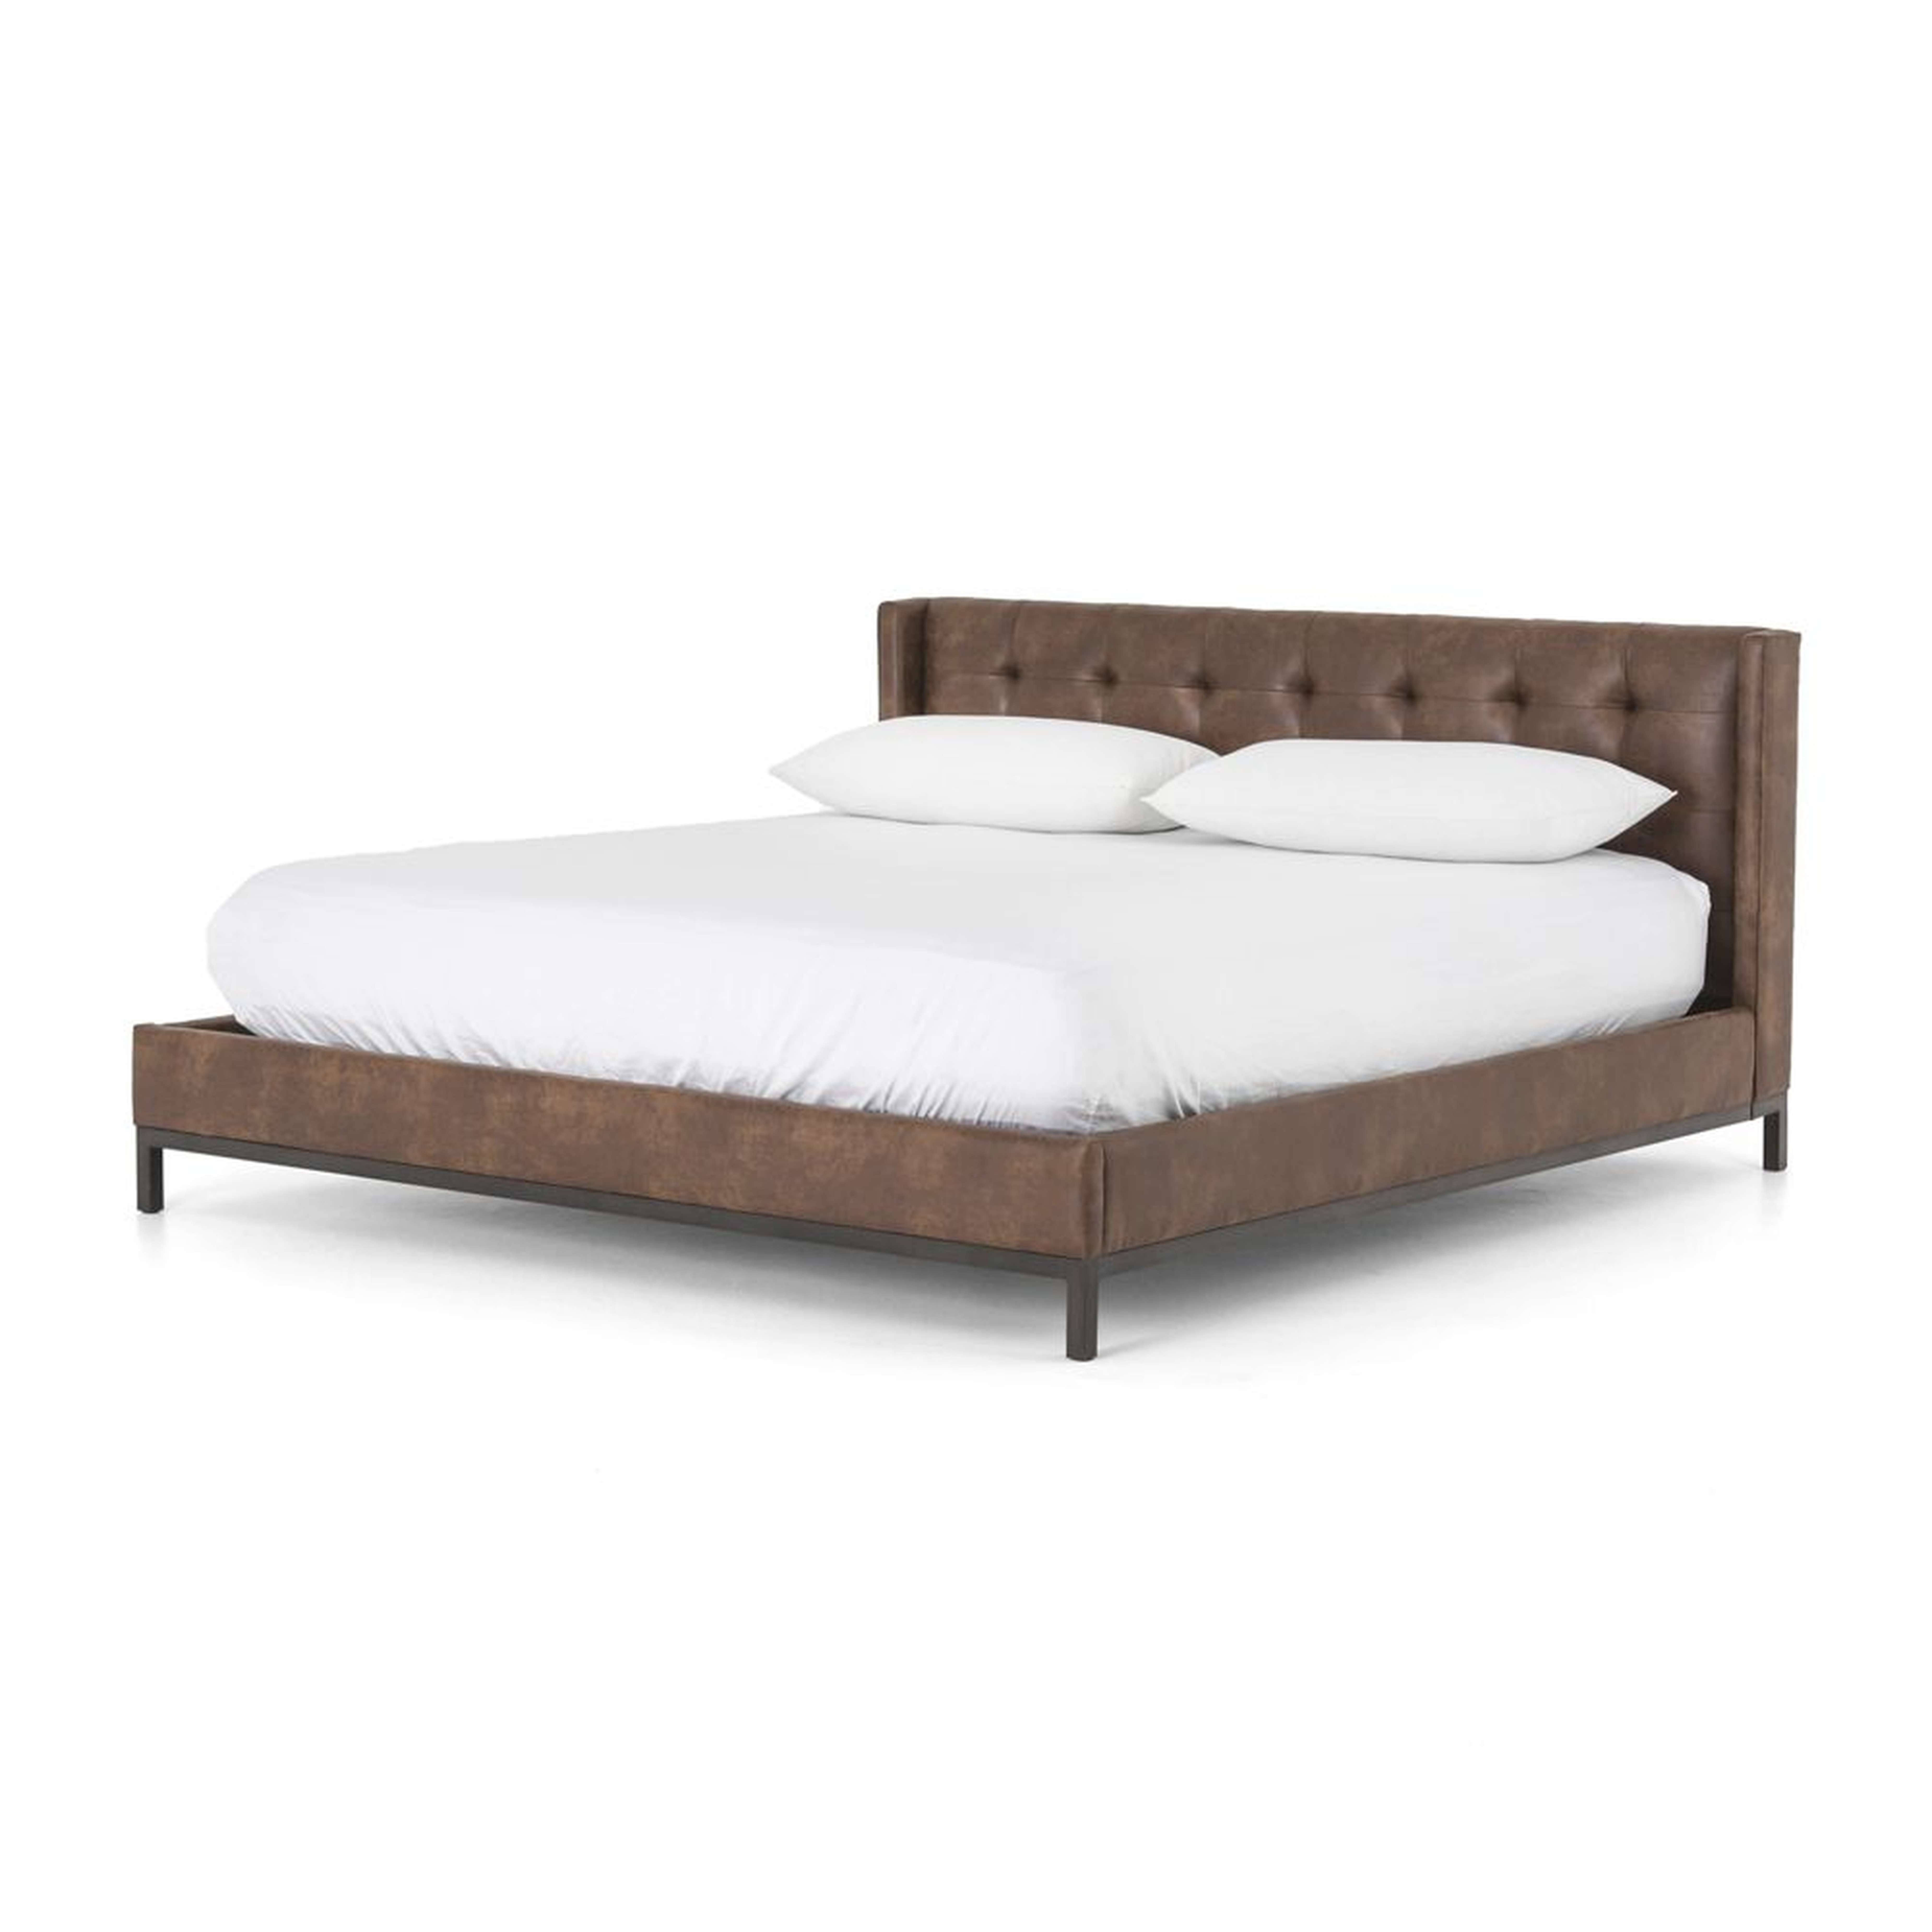 Newhall King Leather Tufted Bed - Crate and Barrel